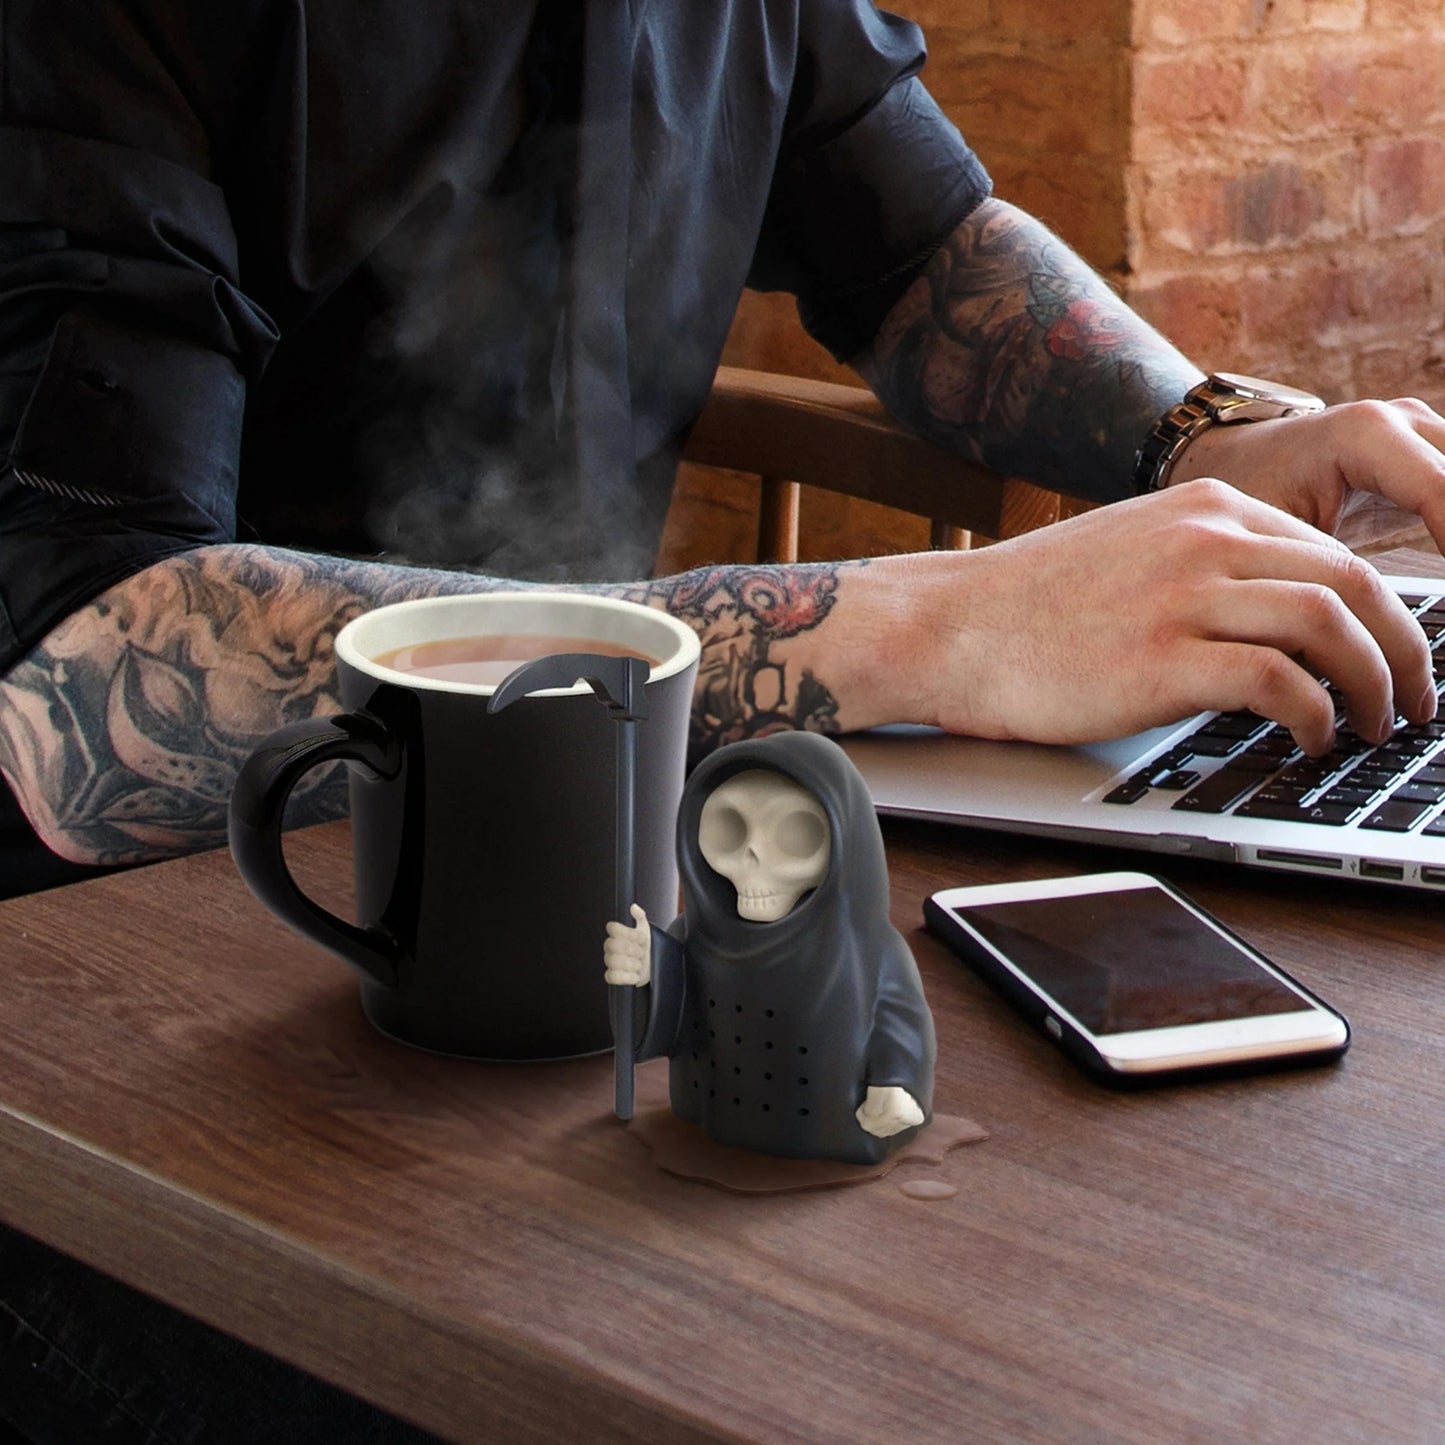 Grim Steeper Tea Infuser set on a desk next to a cup of tea with a person working of a laptop in the background.